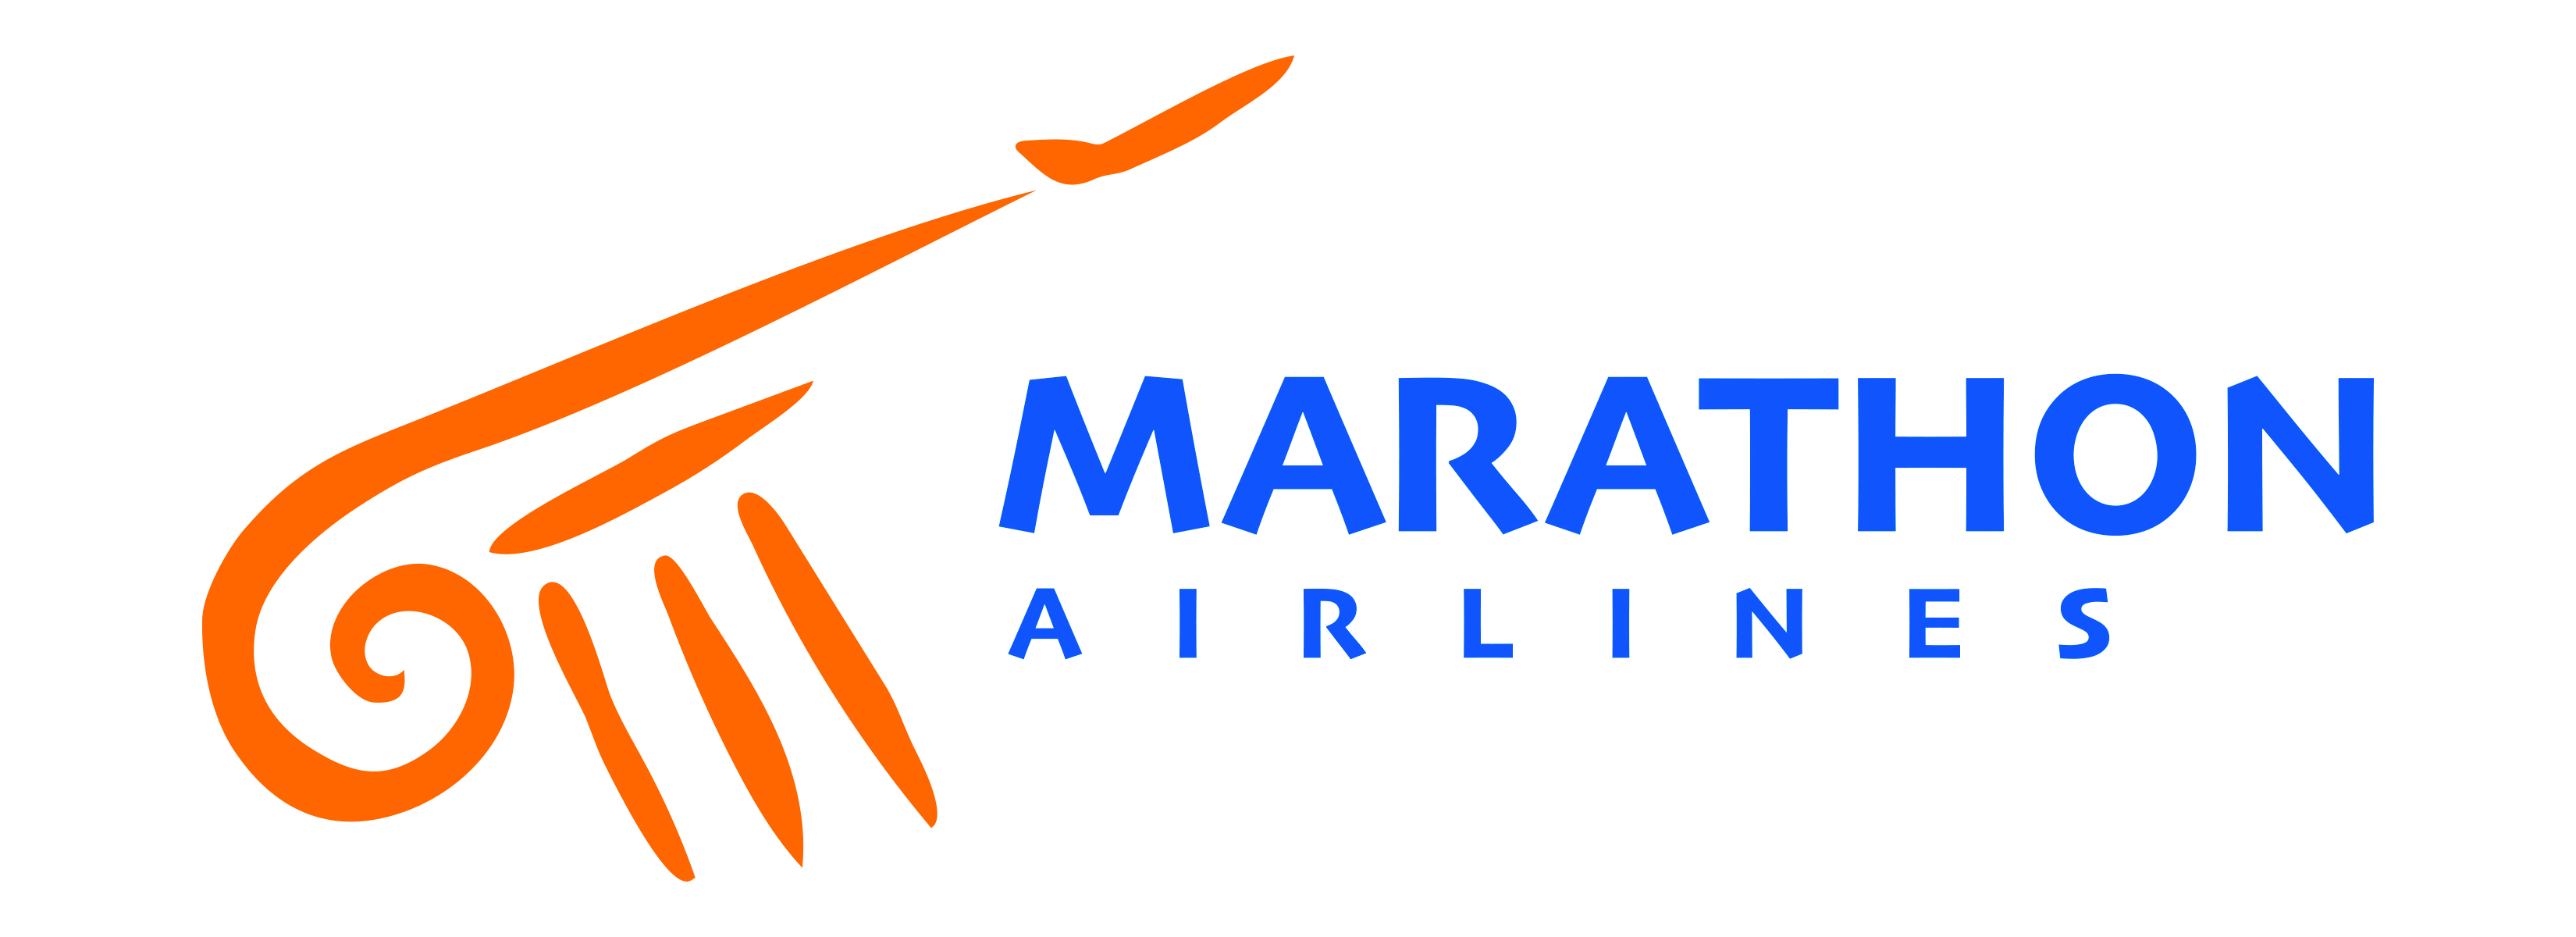 Marathon Airlines S.A. - charter operator